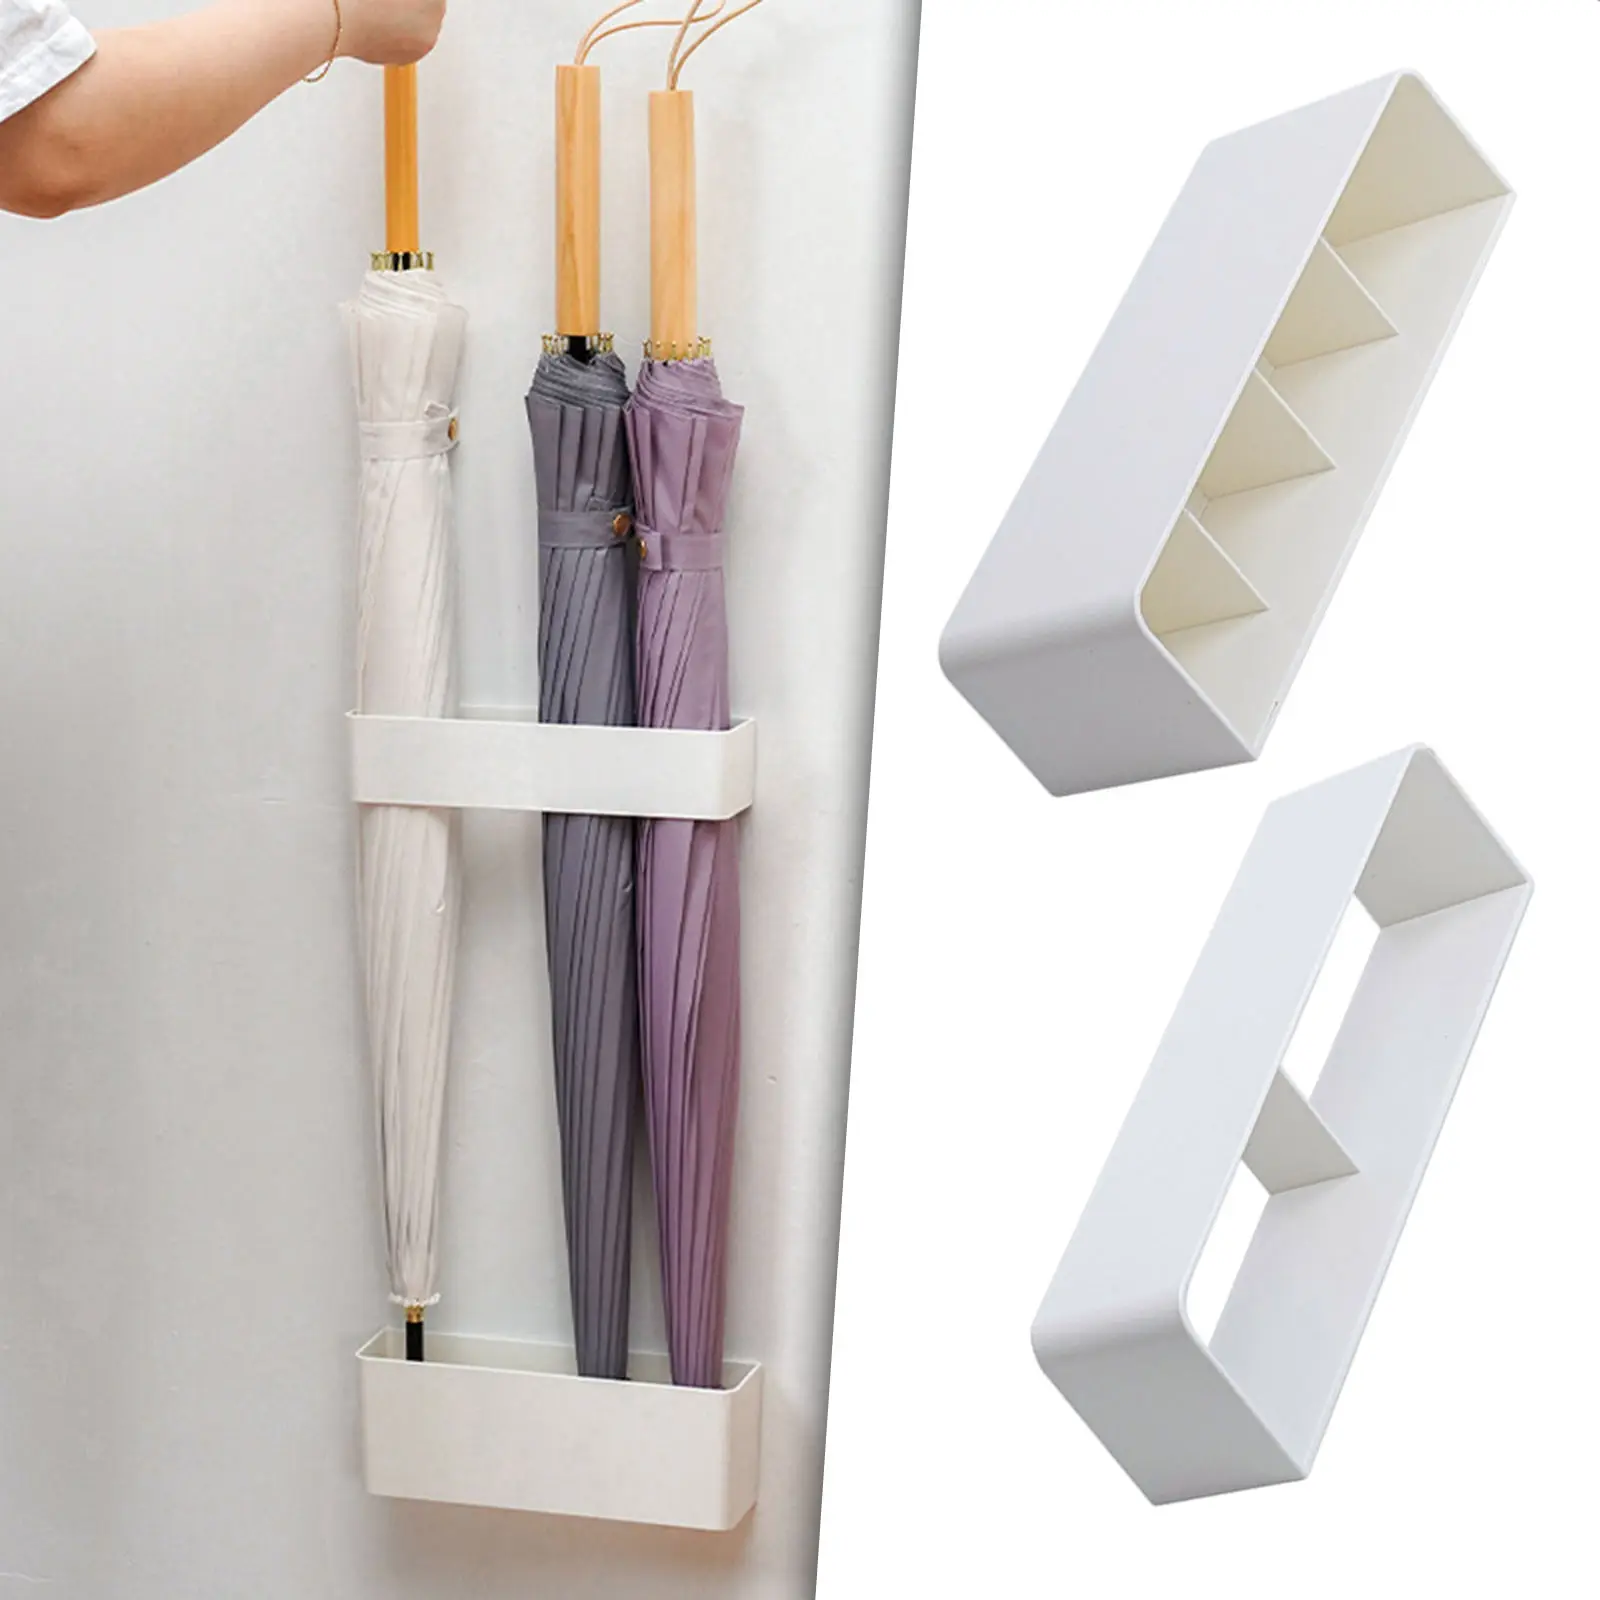 Umbrella Storage Rack Easy-Clean Stand Container Deep Water Accumulation Not Easy Overflow for Hotel Entryway Corridor Entry